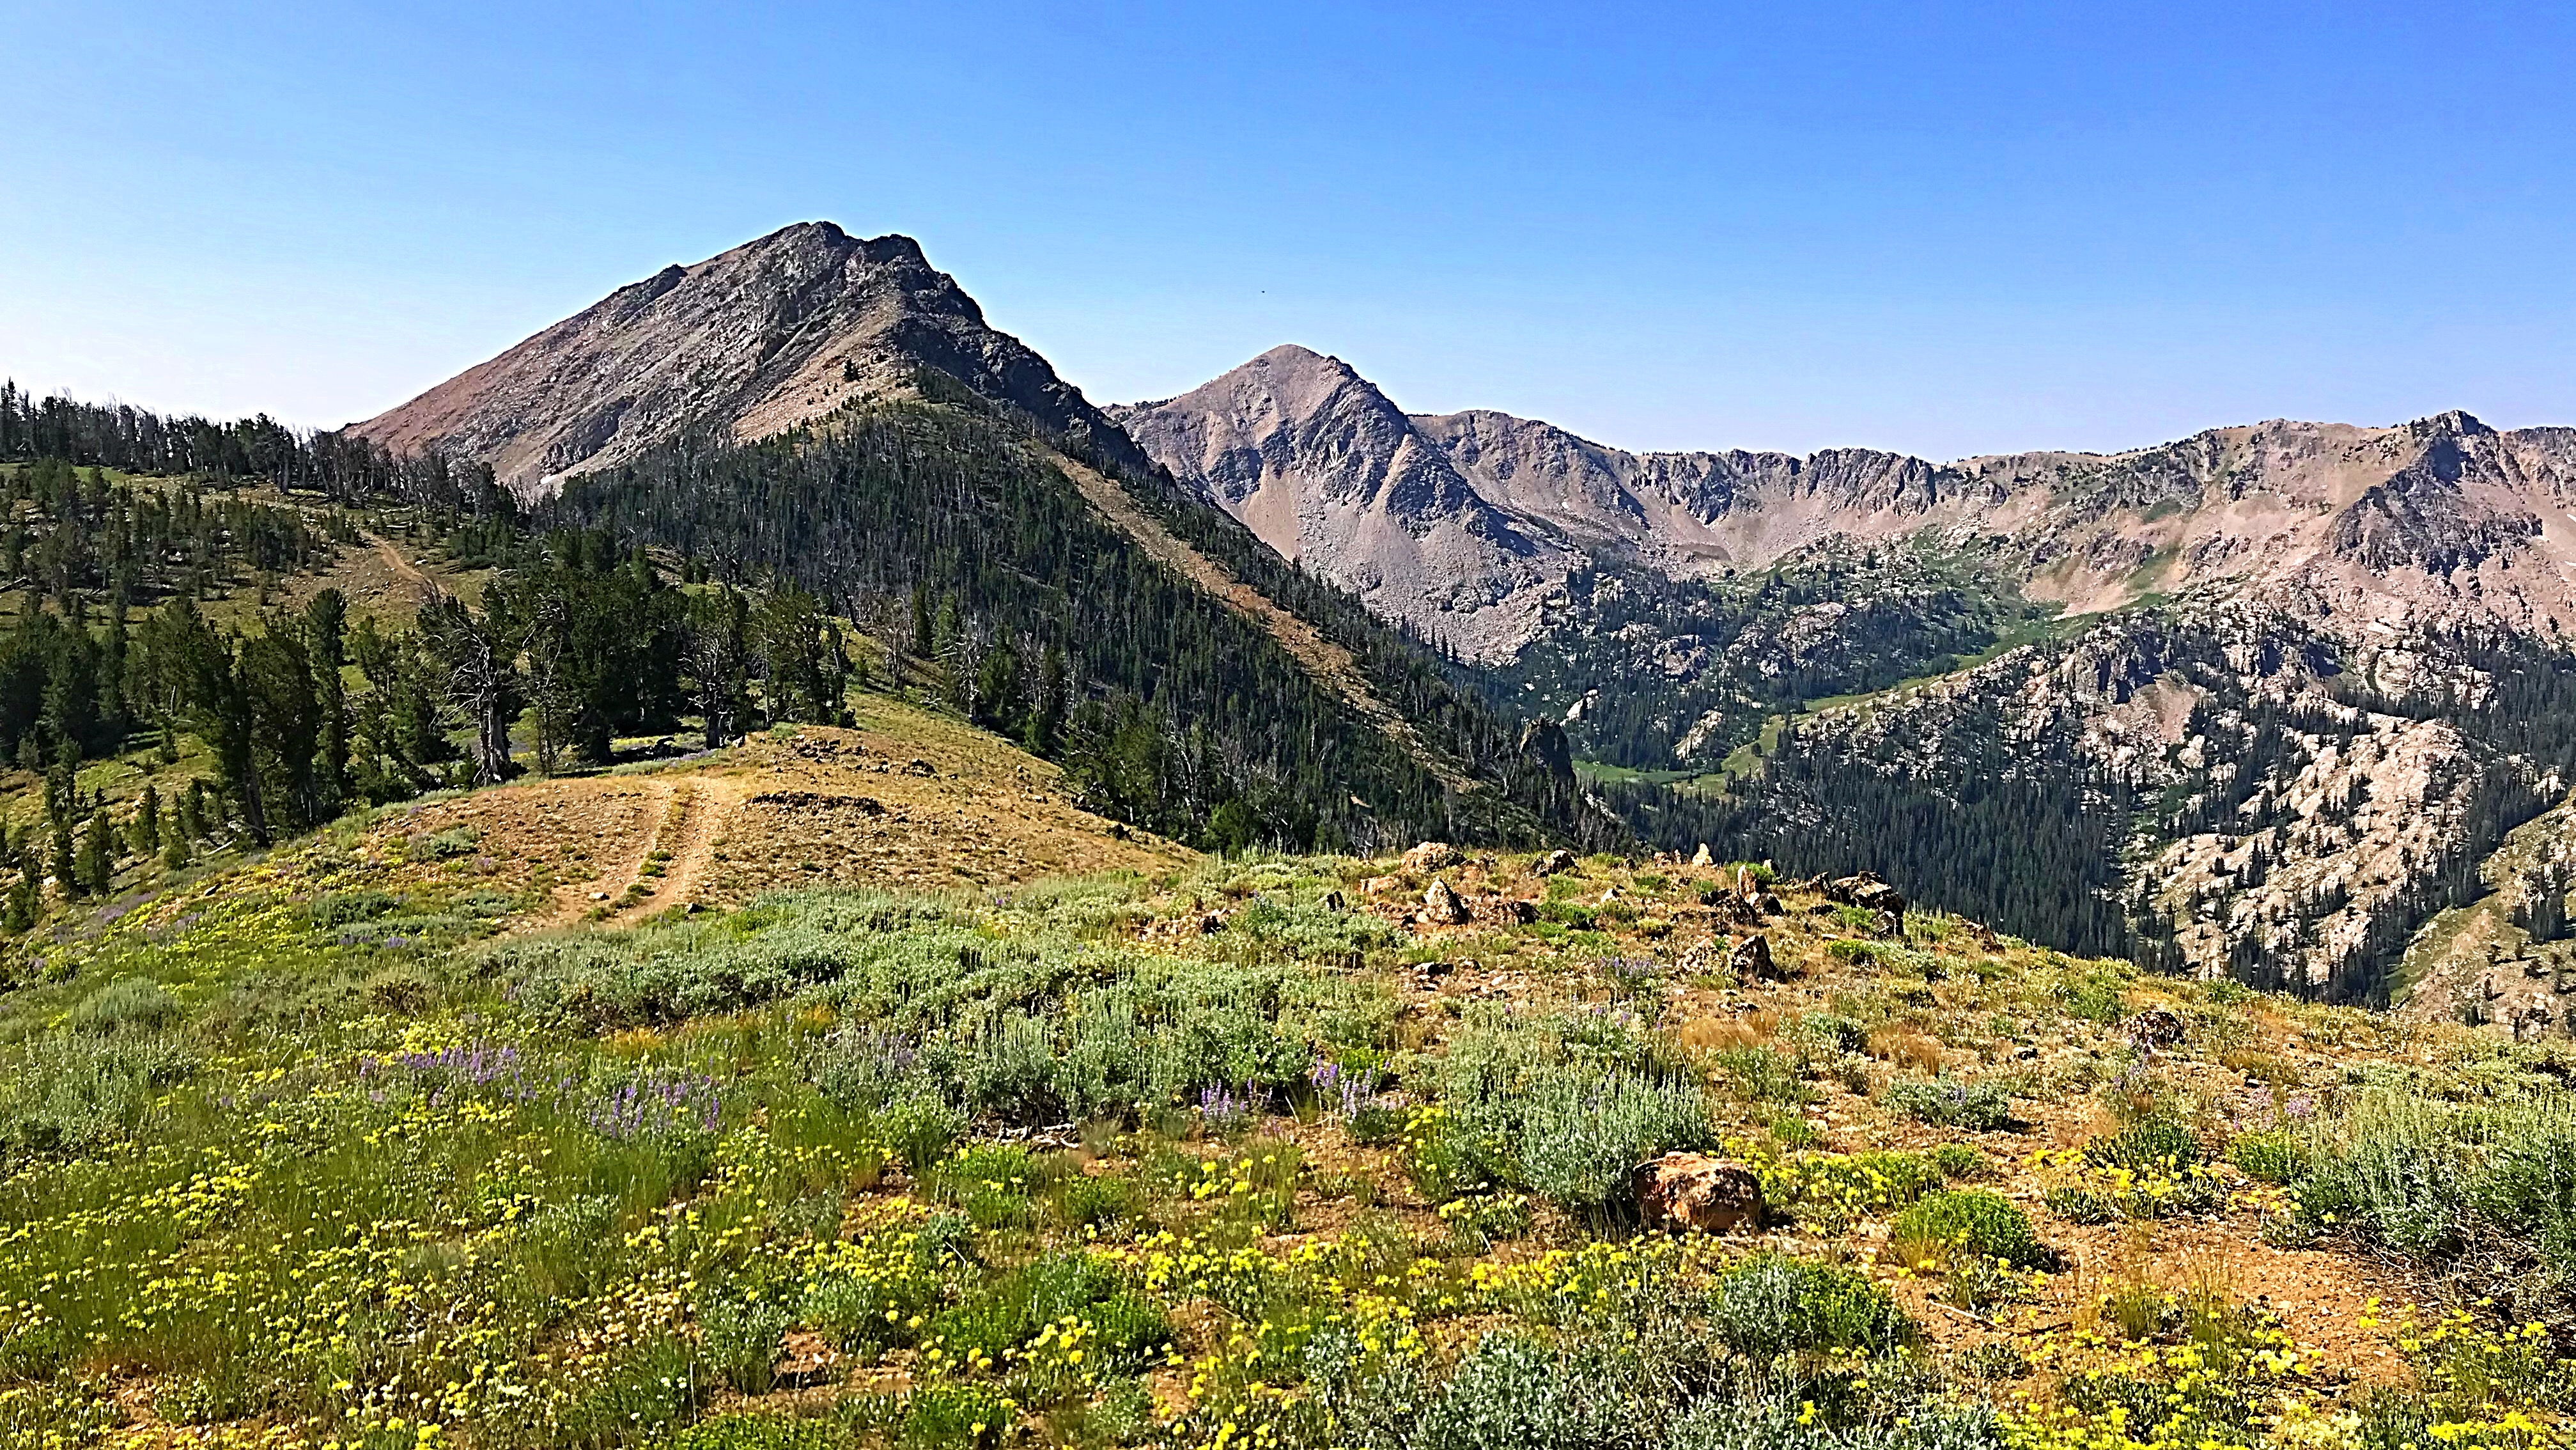 North Smoky (left) and Smoky Dome viewed from the north.